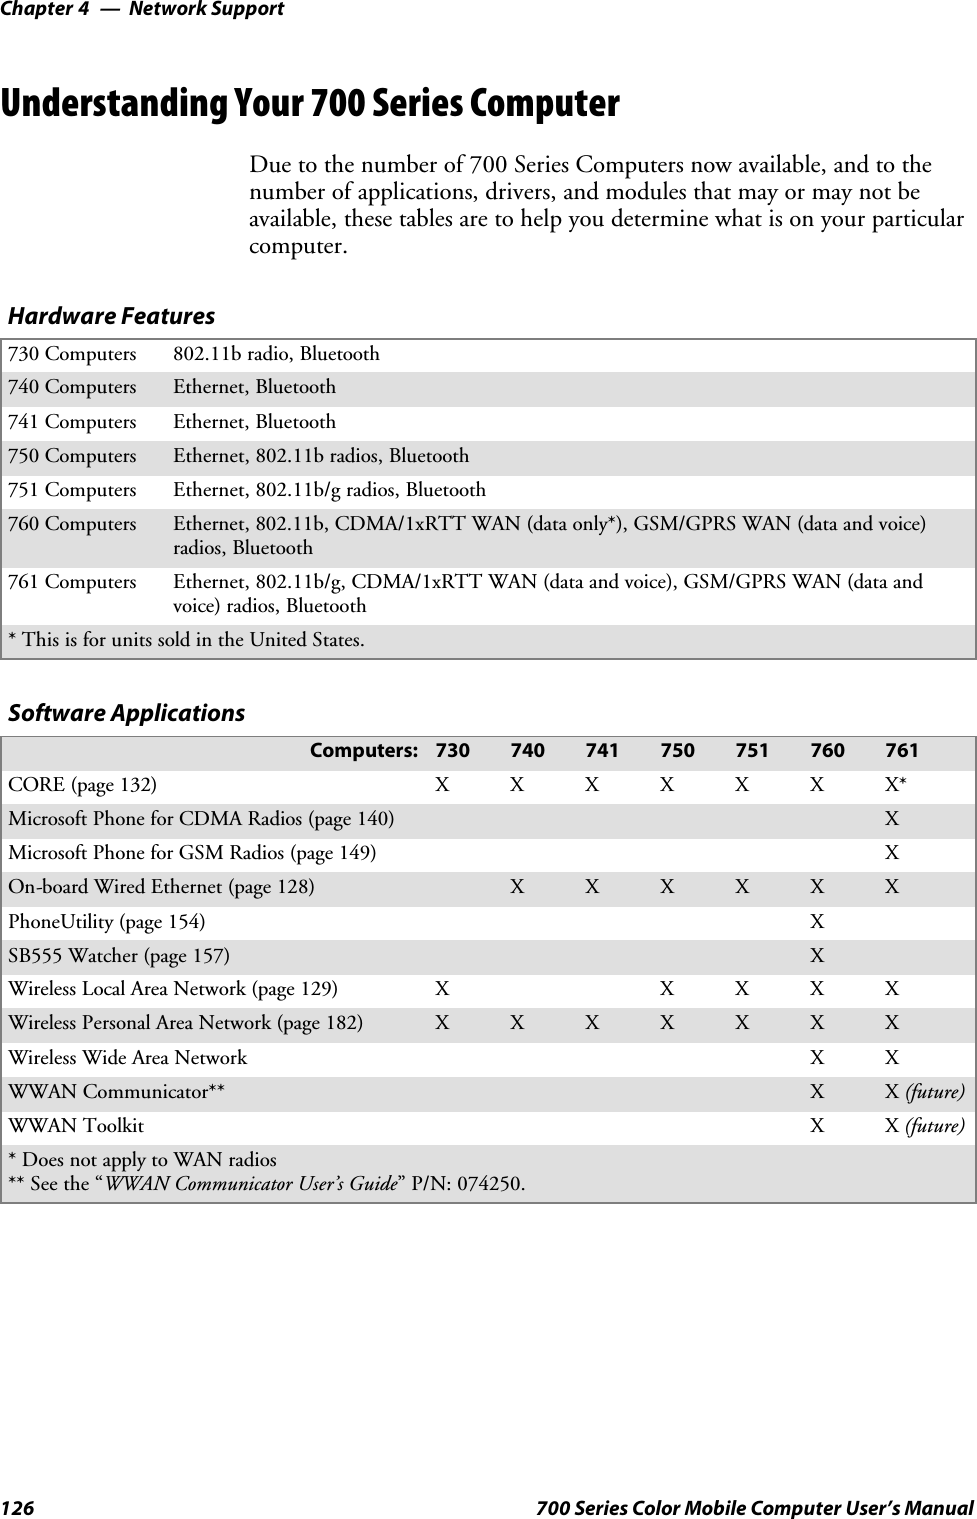 Network SupportChapter —4126 700 Series Color Mobile Computer User’s ManualUnderstanding Your 700 Series ComputerDue to the number of 700 Series Computers now available, and to thenumber of applications, drivers, and modules that may or may not beavailable, these tables are to help you determine what is on your particularcomputer.Hardware Features730 Computers 802.11b radio, Bluetooth740 Computers Ethernet, Bluetooth741 Computers Ethernet, Bluetooth750 Computers Ethernet, 802.11b radios, Bluetooth751 Computers Ethernet, 802.11b/g radios, Bluetooth760 Computers Ethernet, 802.11b, CDMA/1xRTT WAN (data only*), GSM/GPRS WAN (data and voice)radios, Bluetooth761 Computers Ethernet, 802.11b/g, CDMA/1xRTT WAN (data and voice), GSM/GPRS WAN (data andvoice) radios, Bluetooth*ThisisforunitssoldintheUnitedStates.Software ApplicationsComputers: 730 740 741 750 751 760 761CORE (page 132) XXXXXXX*Microsoft Phone for CDMA Radios (page 140) XMicrosoft Phone for GSM Radios (page 149) XOn-board Wired Ethernet (page 128) XXXXXXPhoneUtility (page 154) XSB555 Watcher (page 157) XWireless Local Area Network (page 129) X XXXXWireless Personal Area Network (page 182) XXXXXXXWireless Wide Area Network XXWWAN Communicator** X X (future)WWAN Toolkit XX(future)* Does not apply to WAN radios** See the “WWAN Communicator User’s Guide” P/N: 074250.